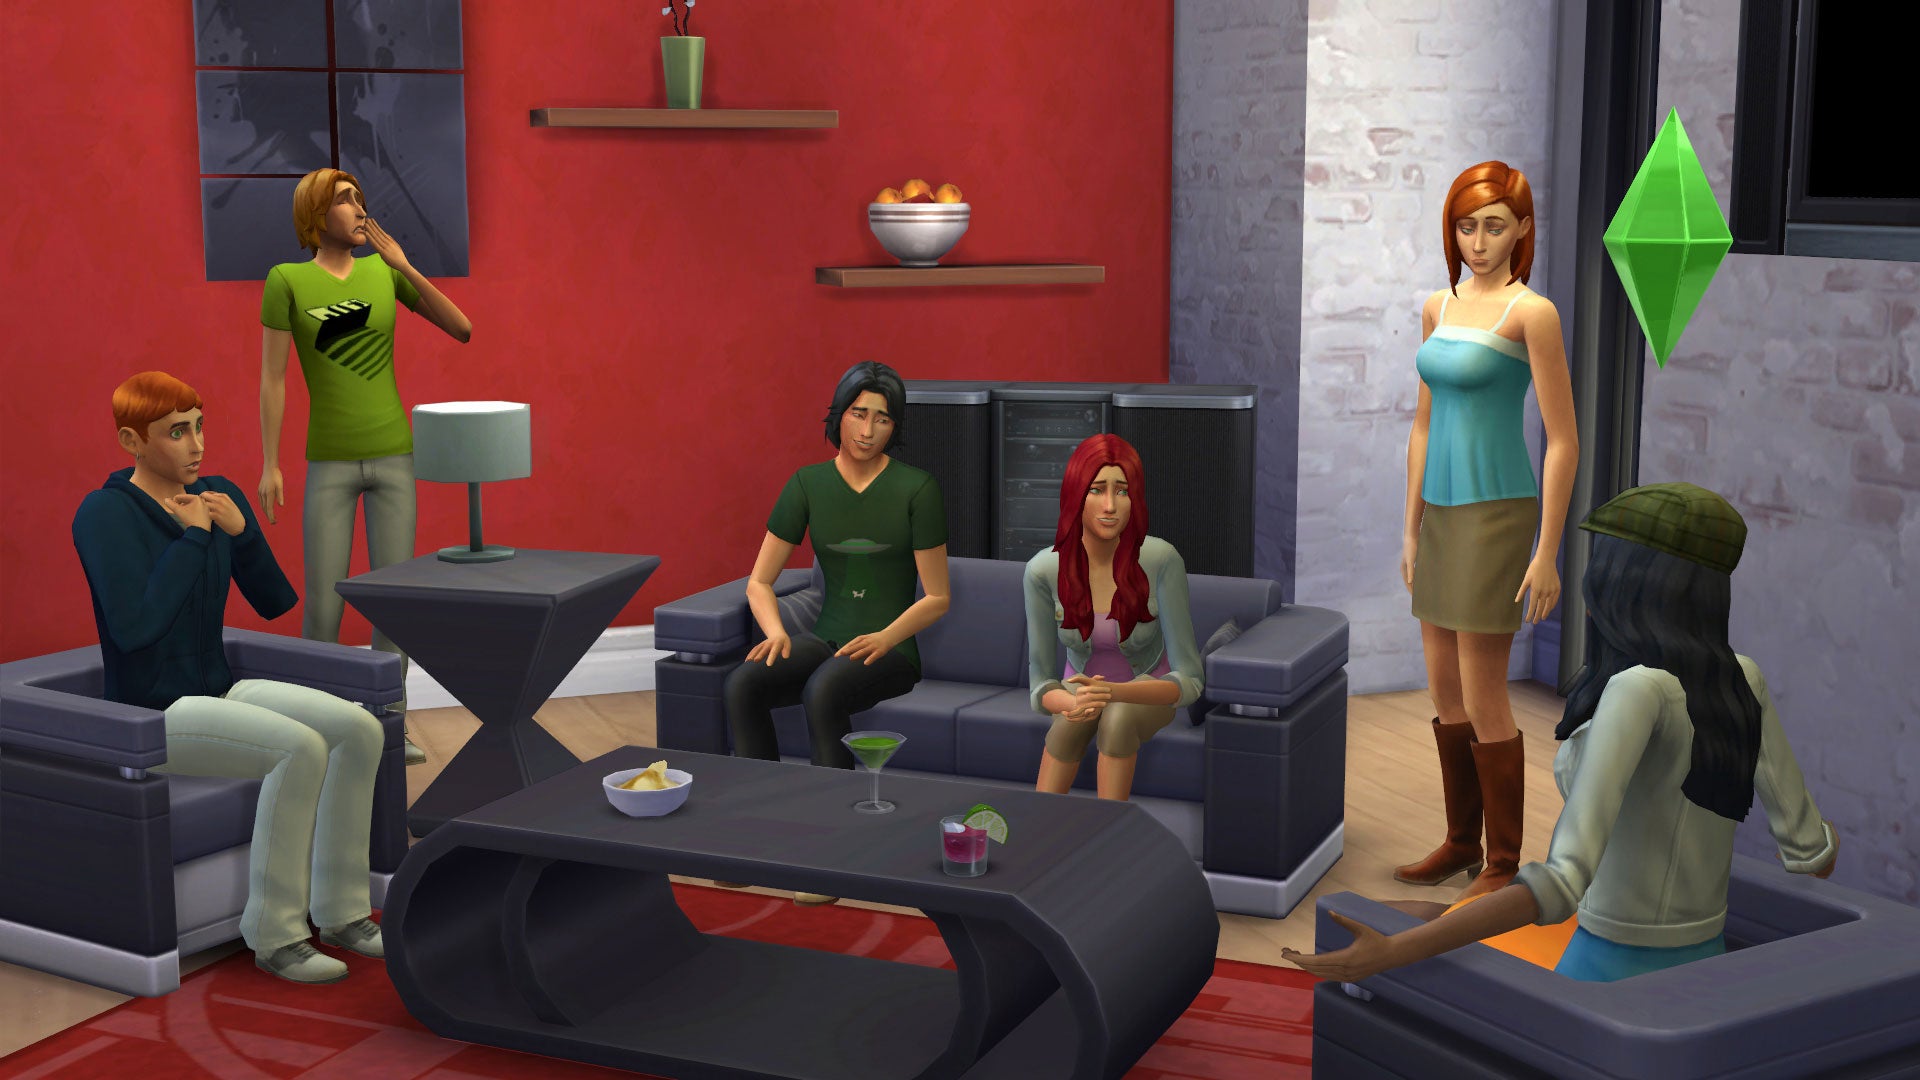 sims 4 teen pregnancy mod download